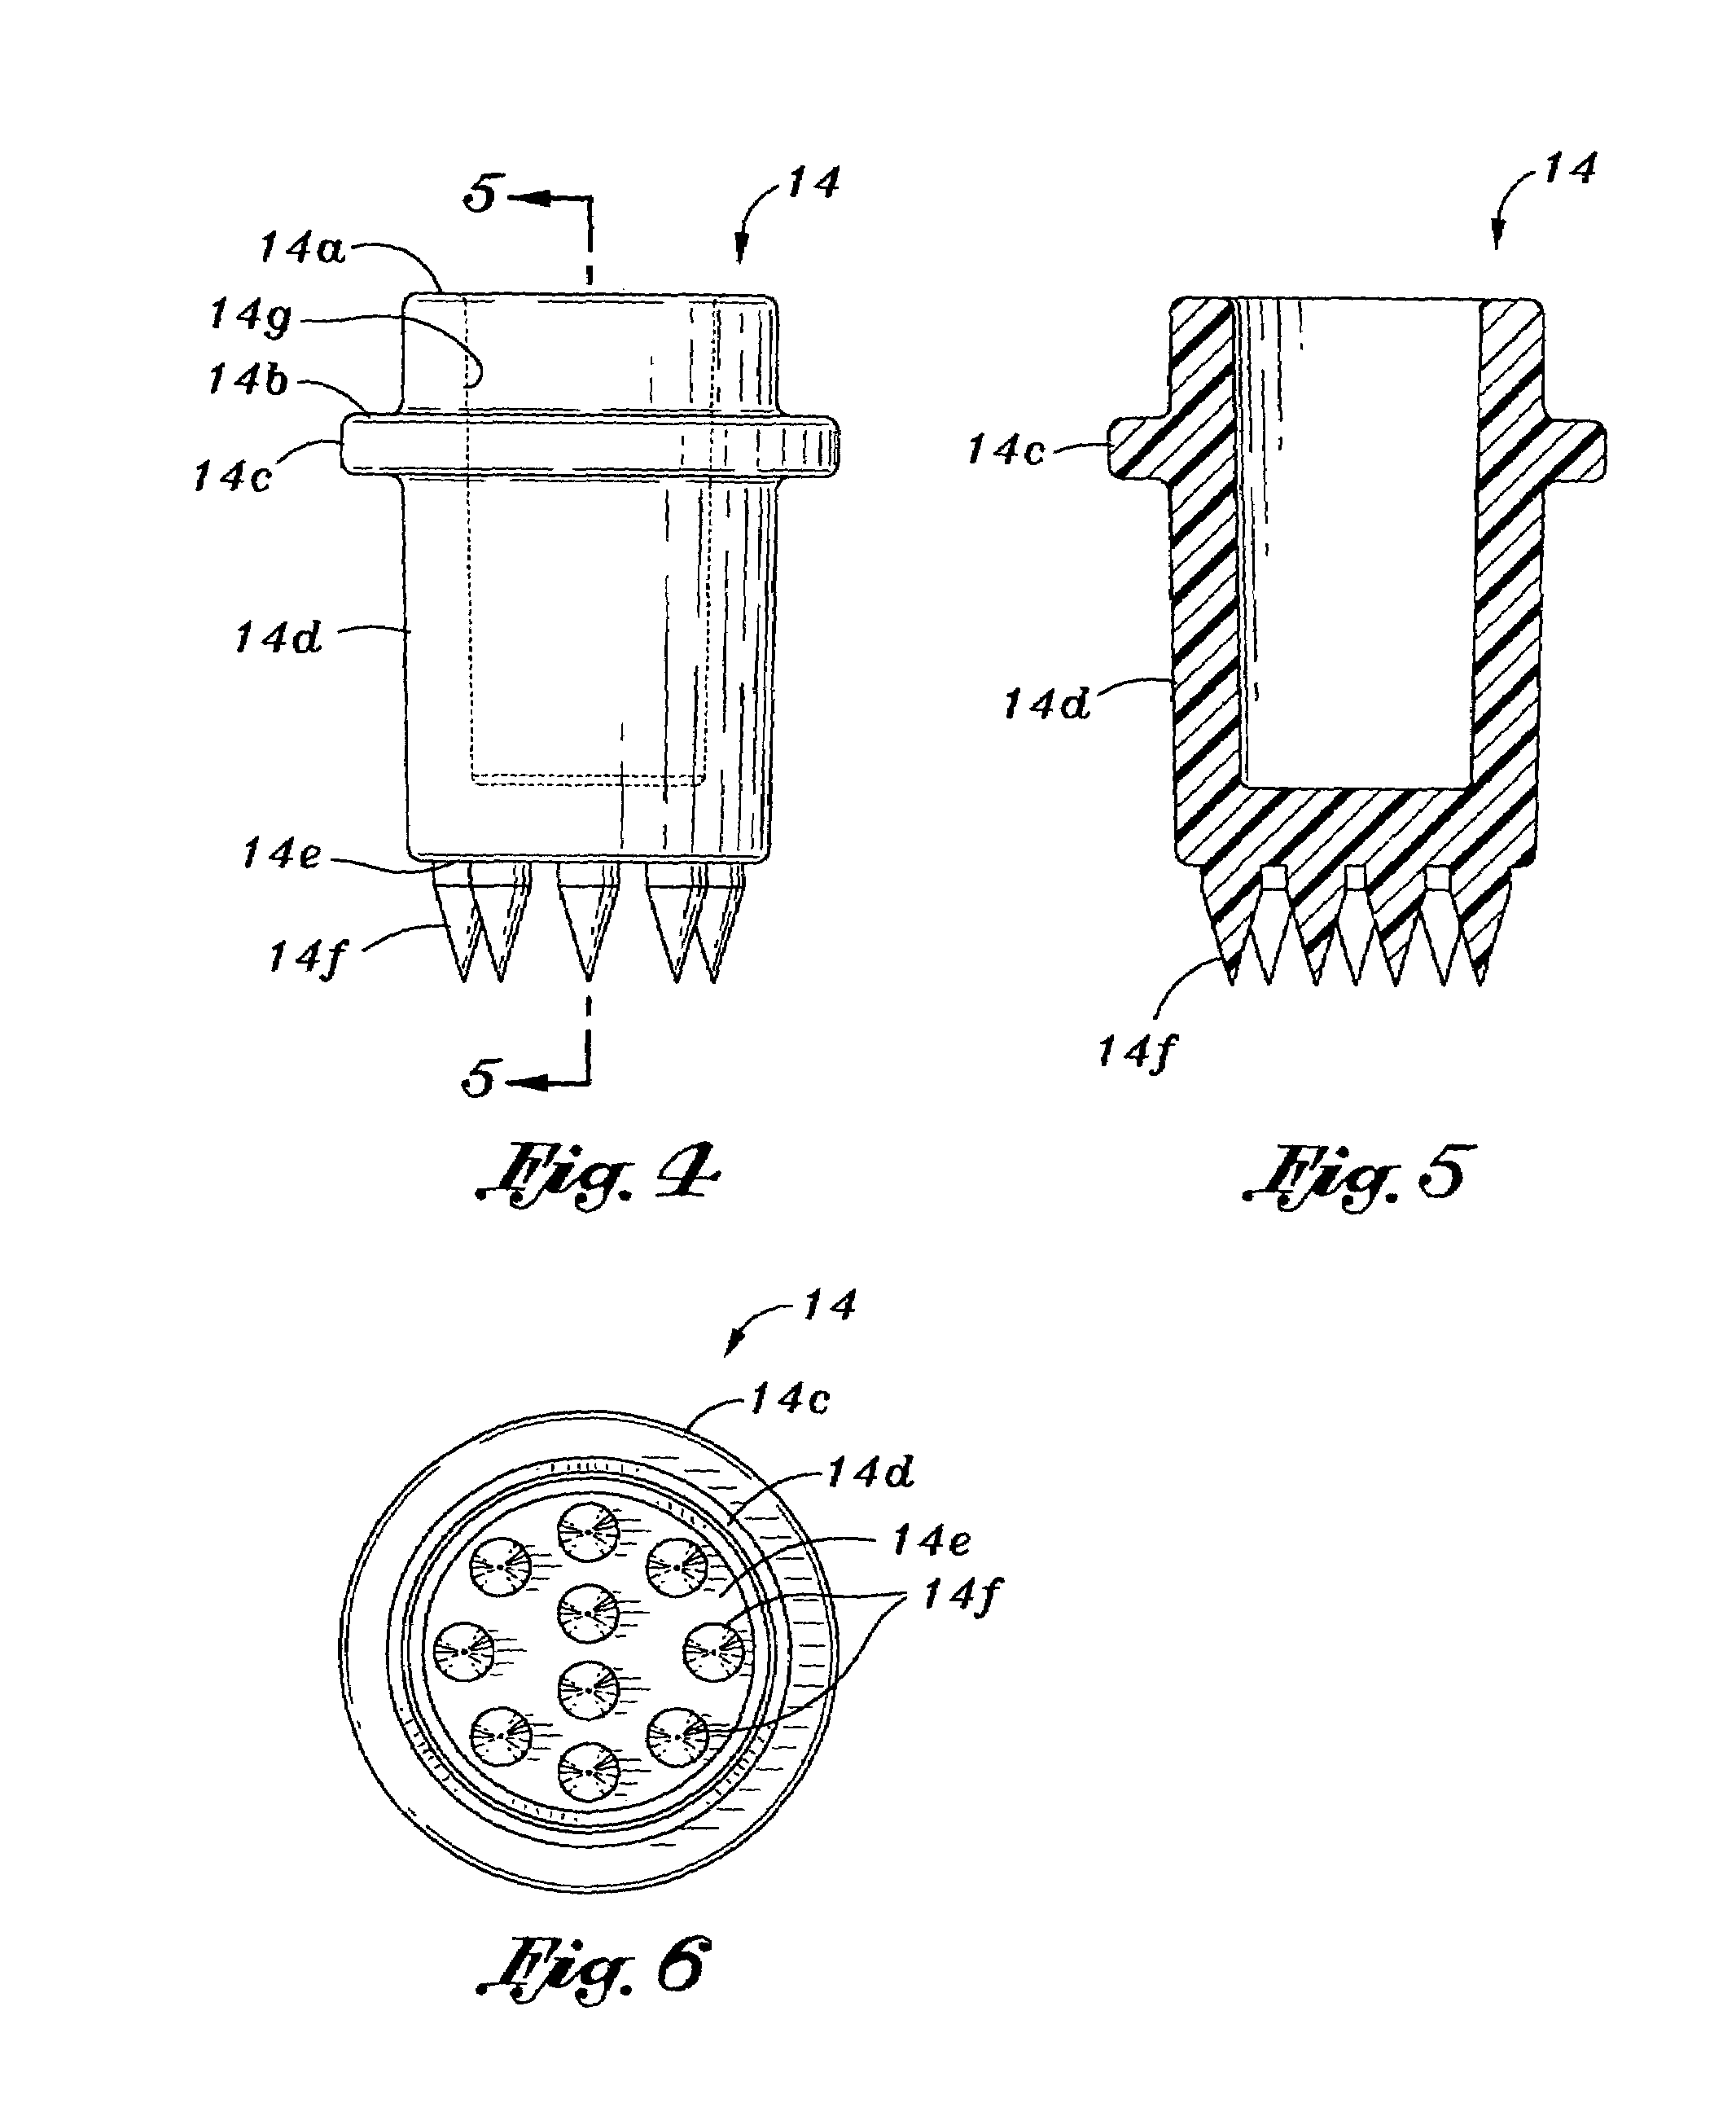 Animal tattooing apparatus and procedure thereof